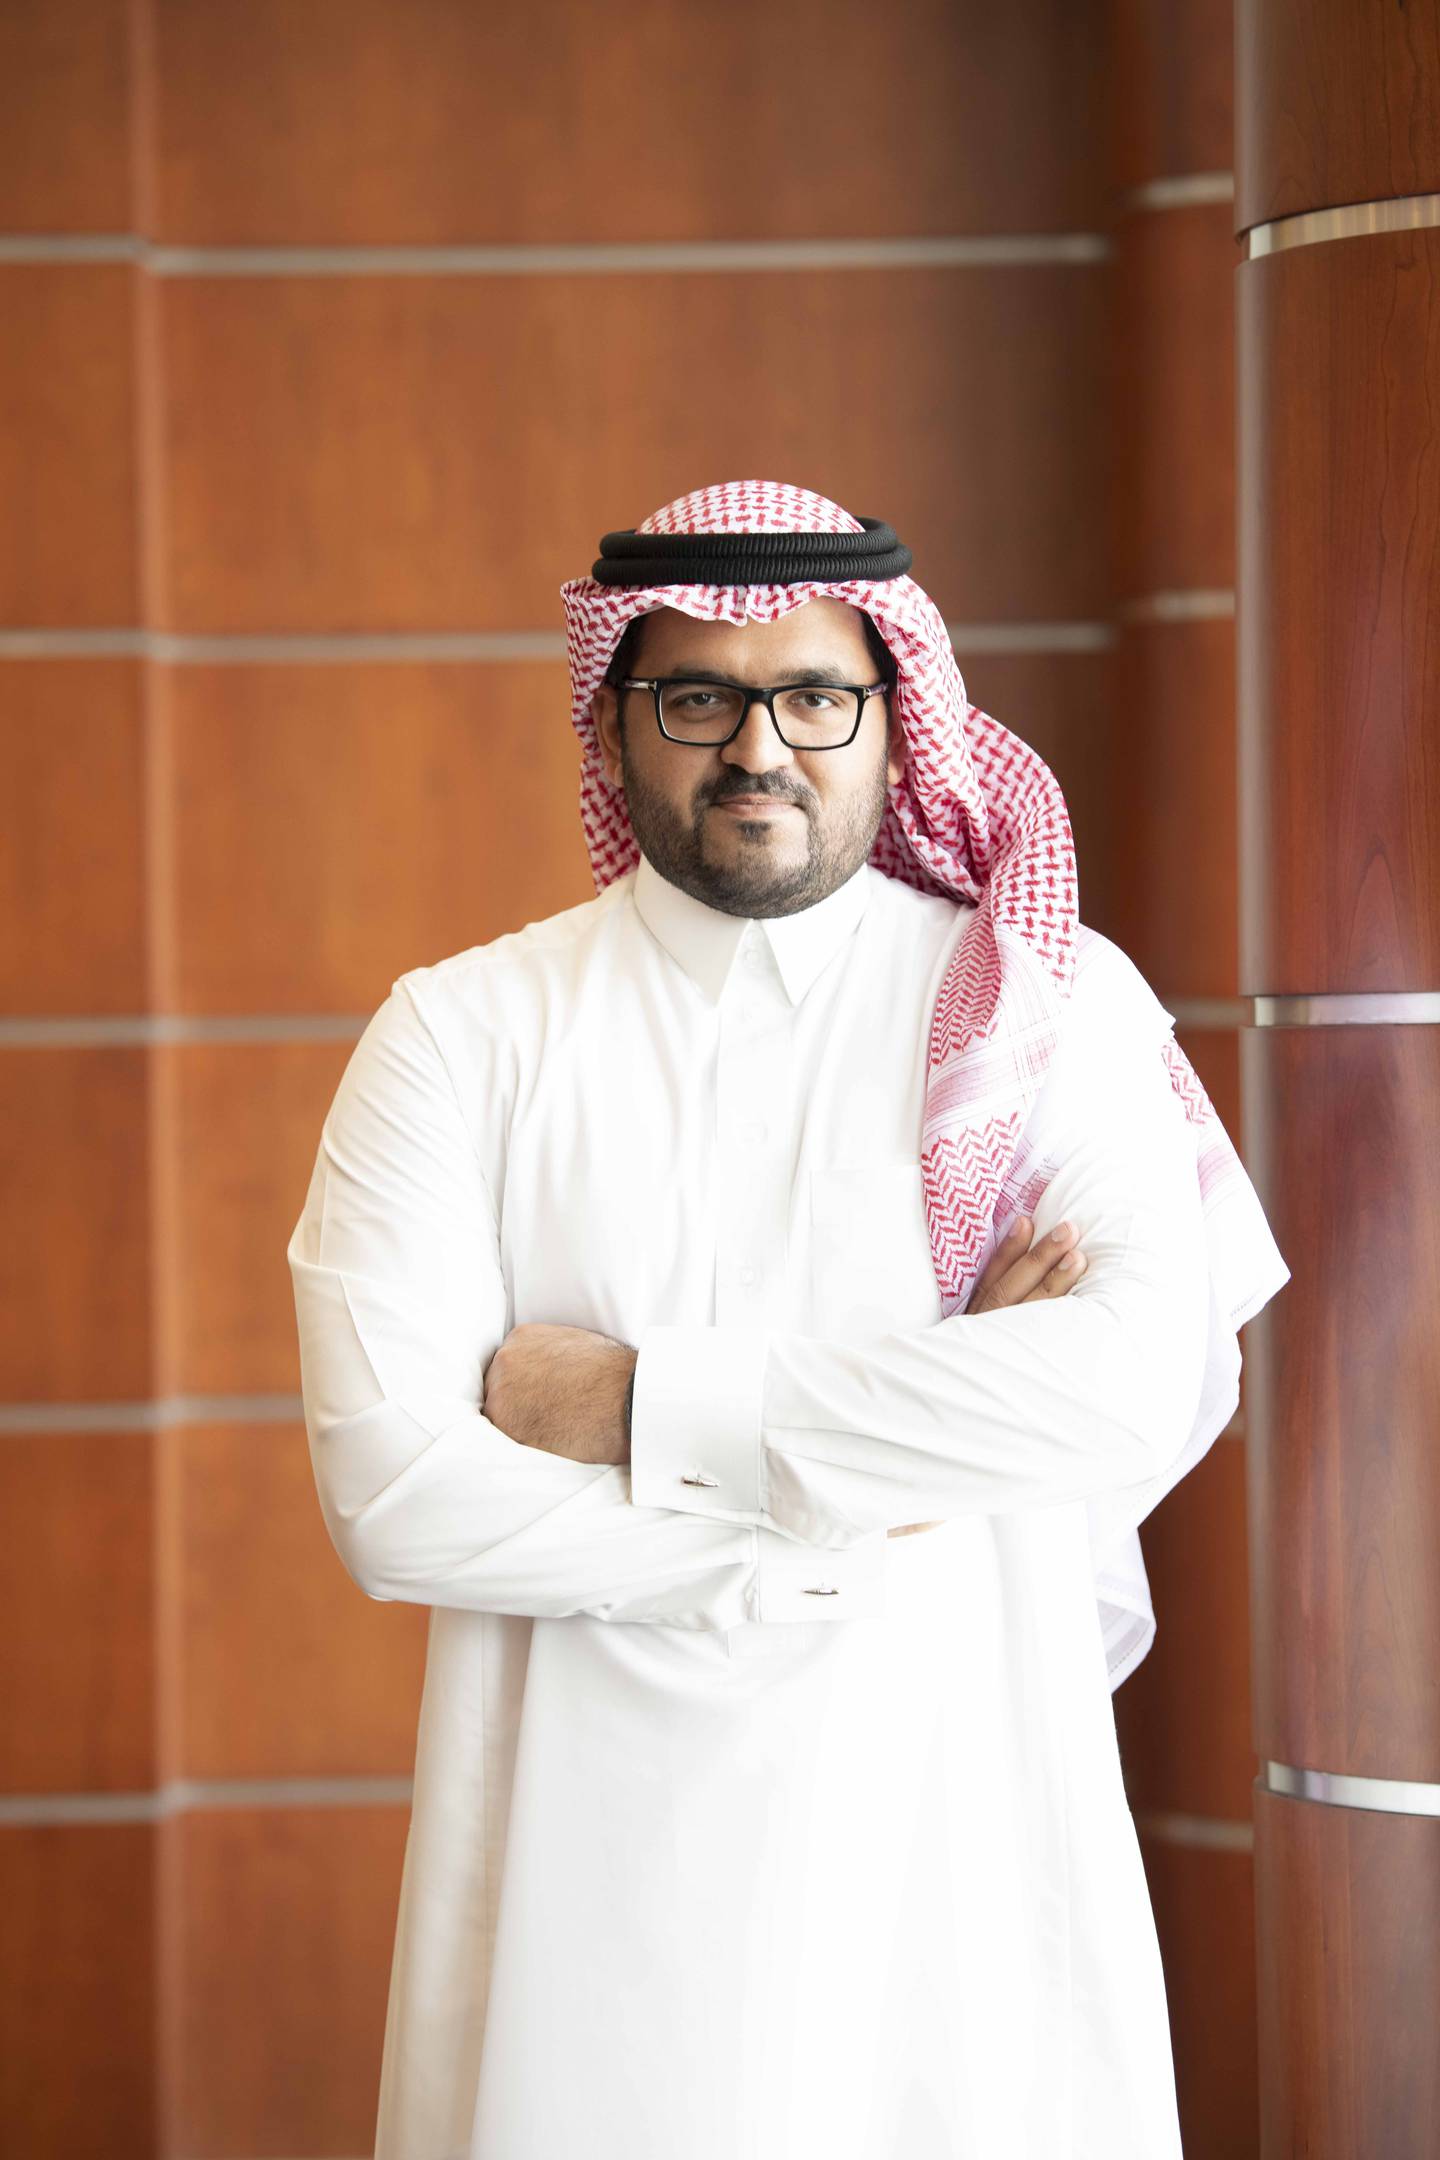 Ahmad AR BinDawood, chief executive of BinDawood Holding, said the acquisition of Ykone will boost its plans to invest in all segments of the retail e-commerce value chain, Photo: BinDawood Holding